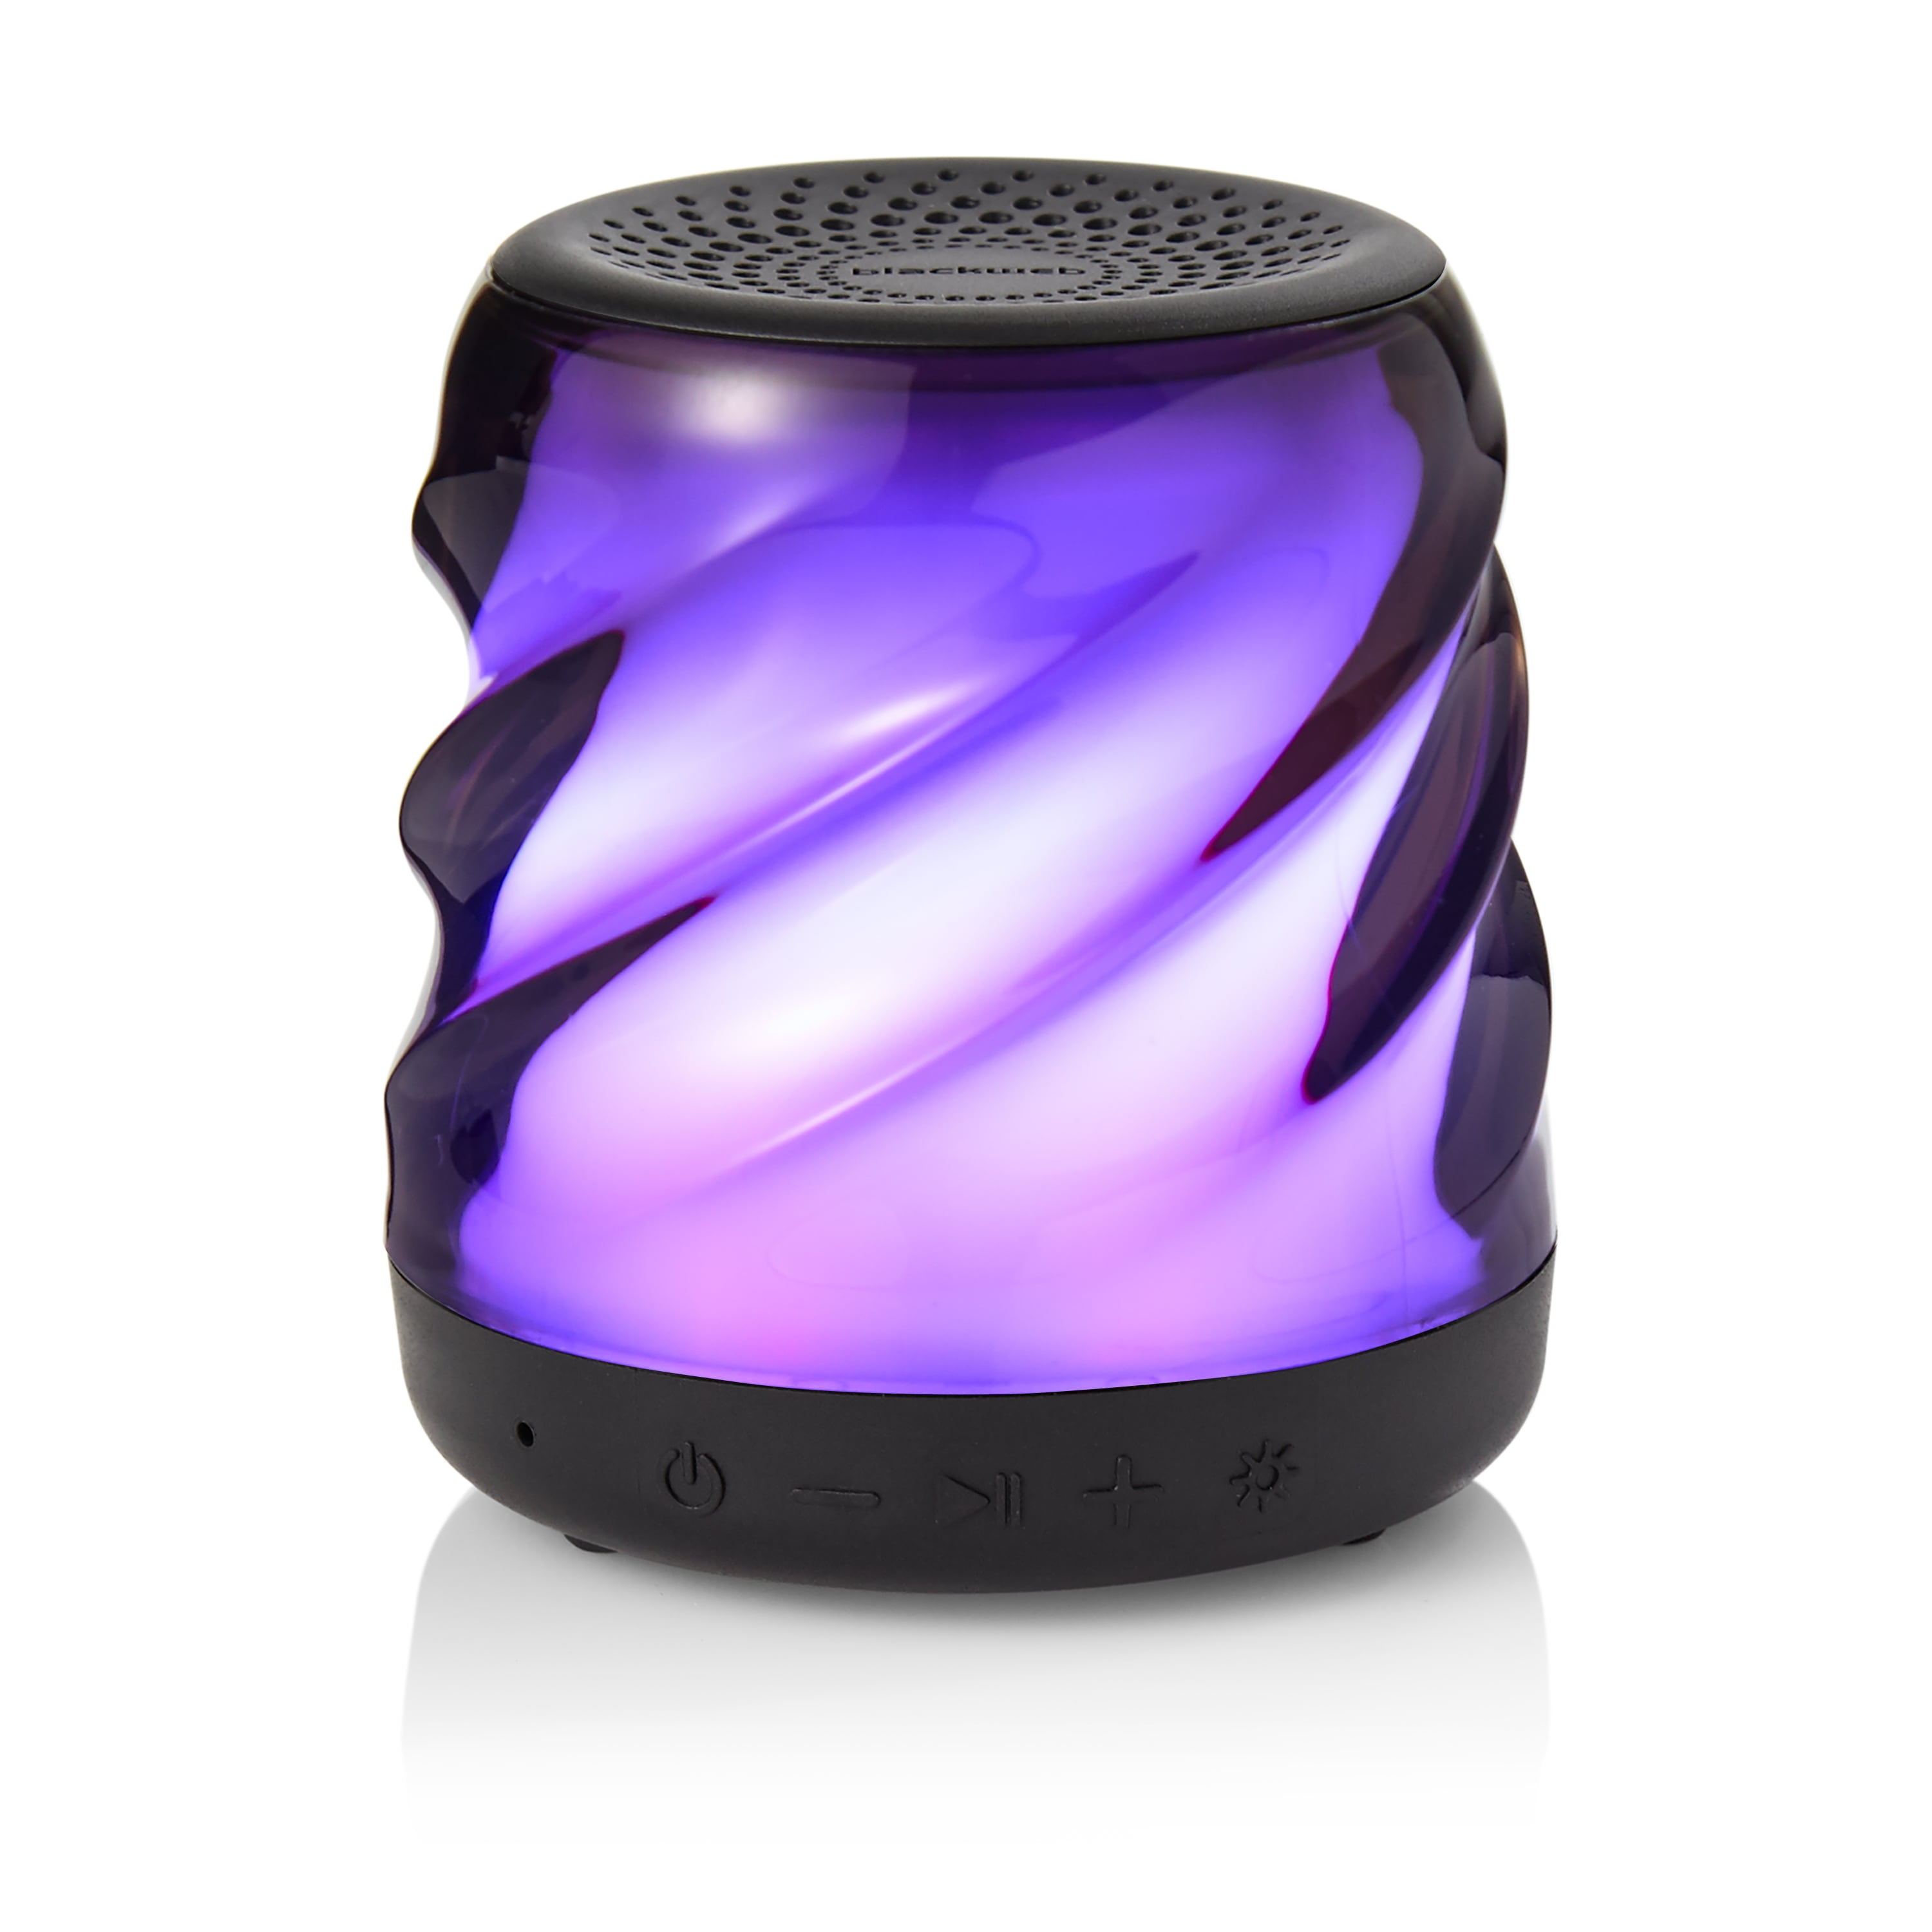 speakers that change color to the beat